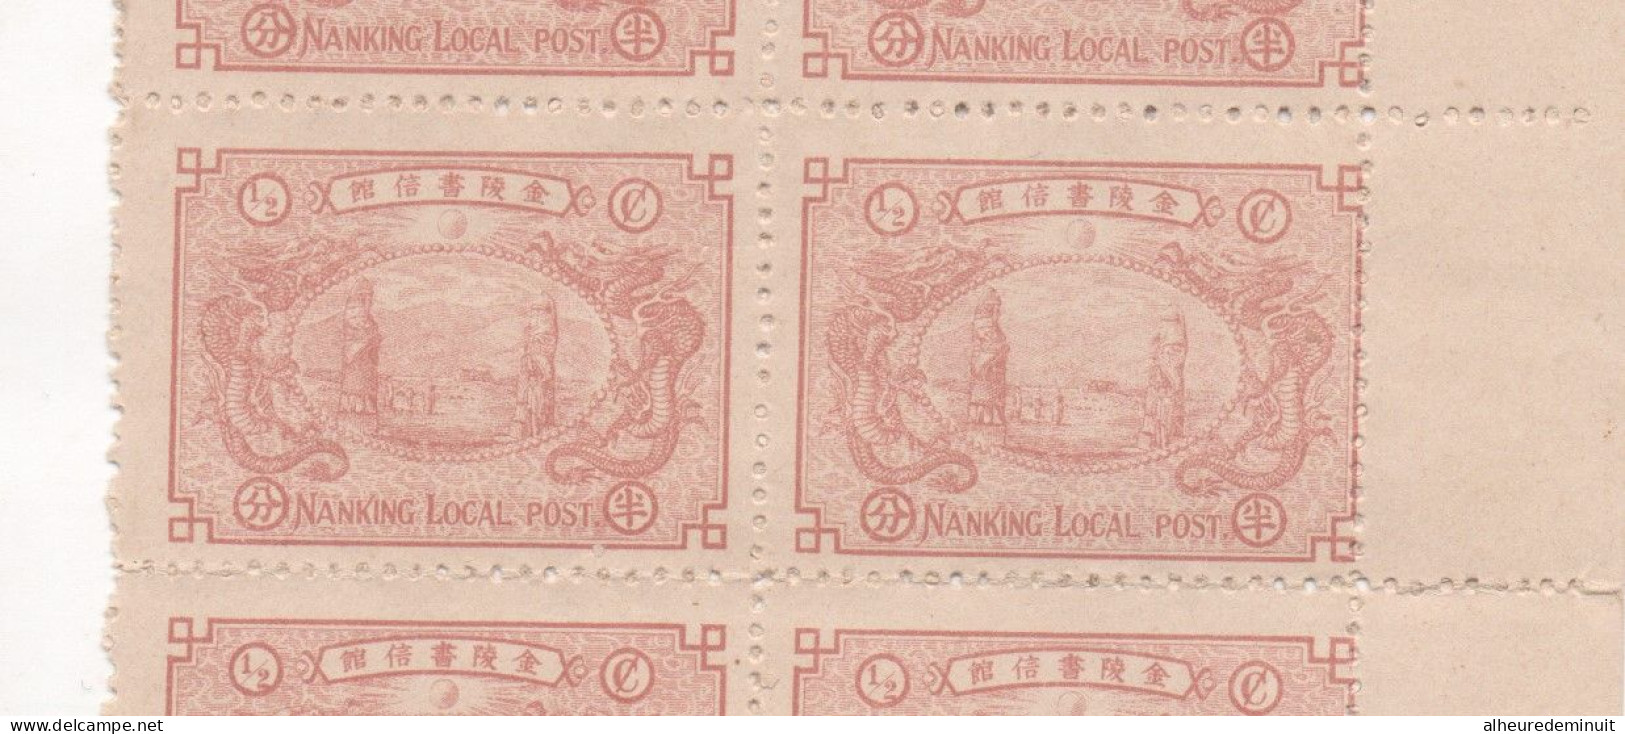 Lot Bande 10 Timbres Non Oblitérés"1896"NANKING LOCAL POST" LOCAL POST 1/2c"china"chine" - Ongebruikt